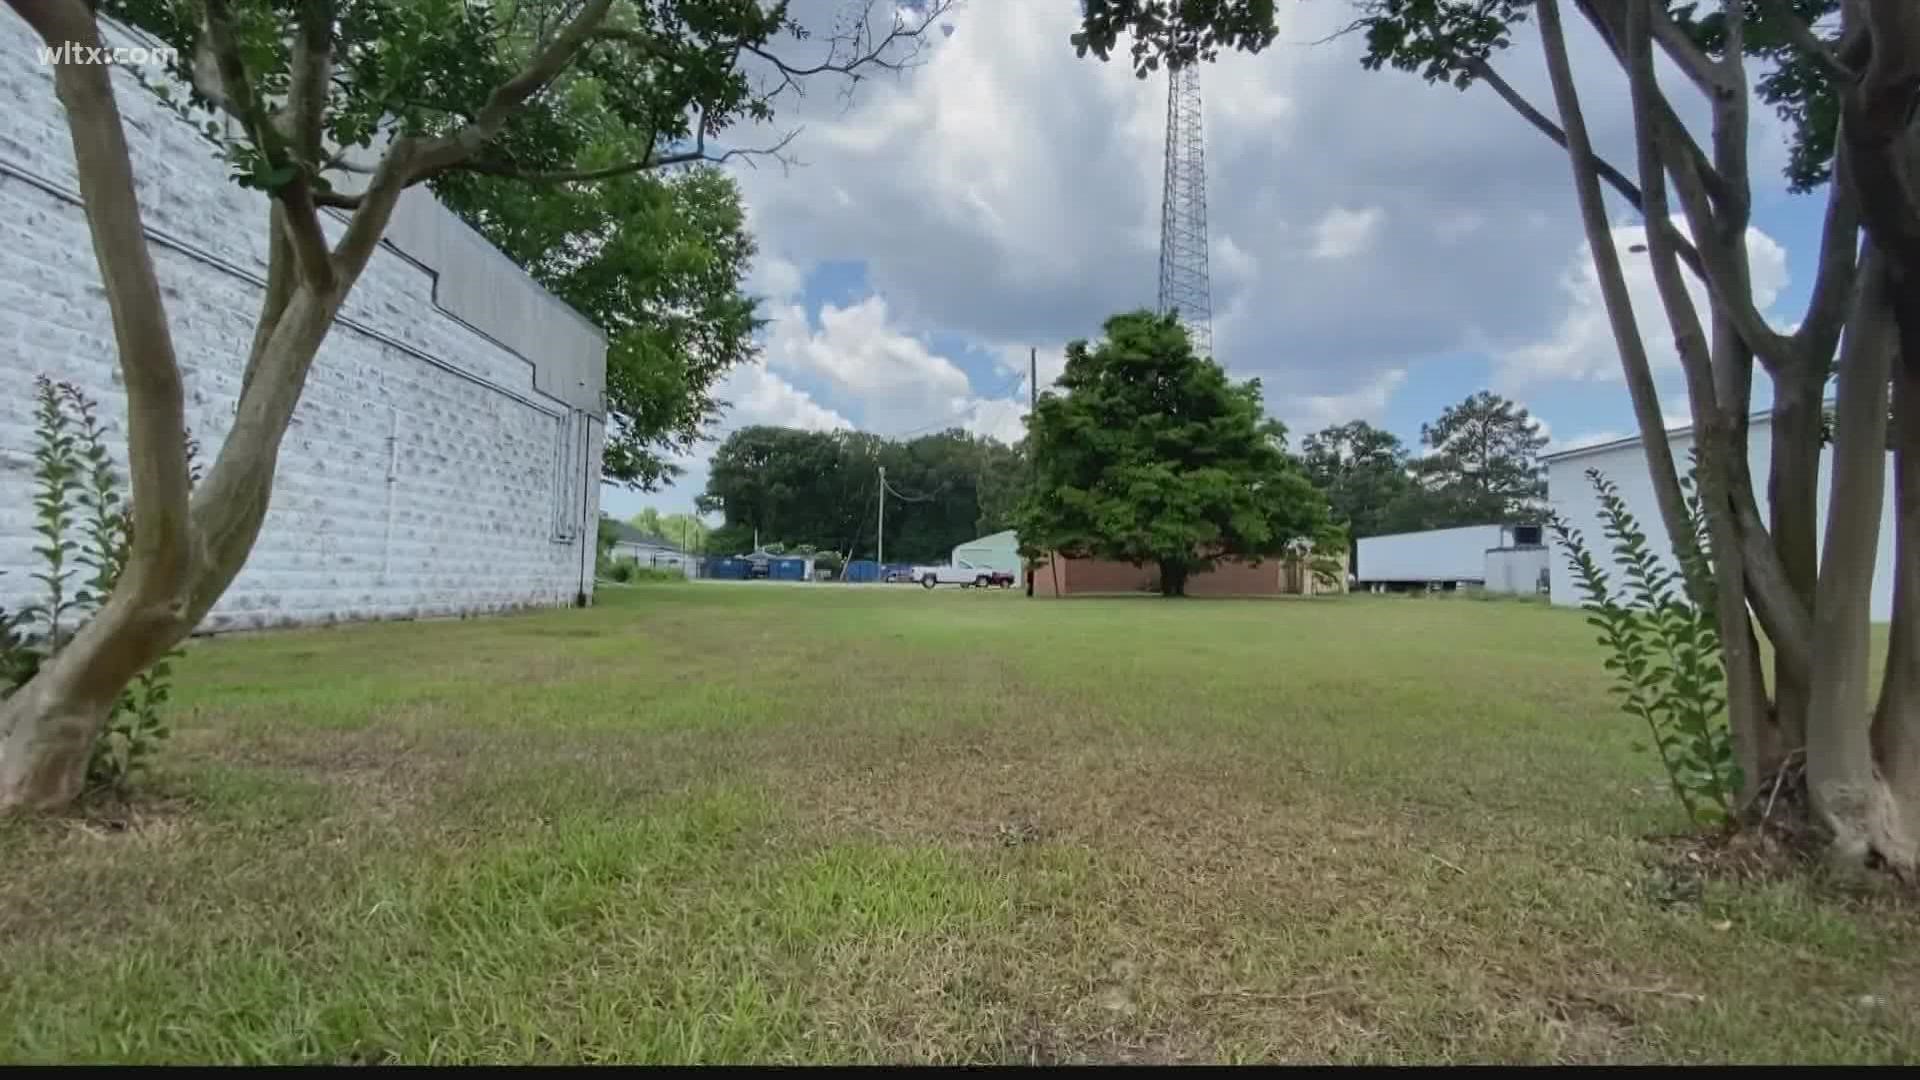 An empty field on Main street will soon become a park, thanks to a $10K donation.